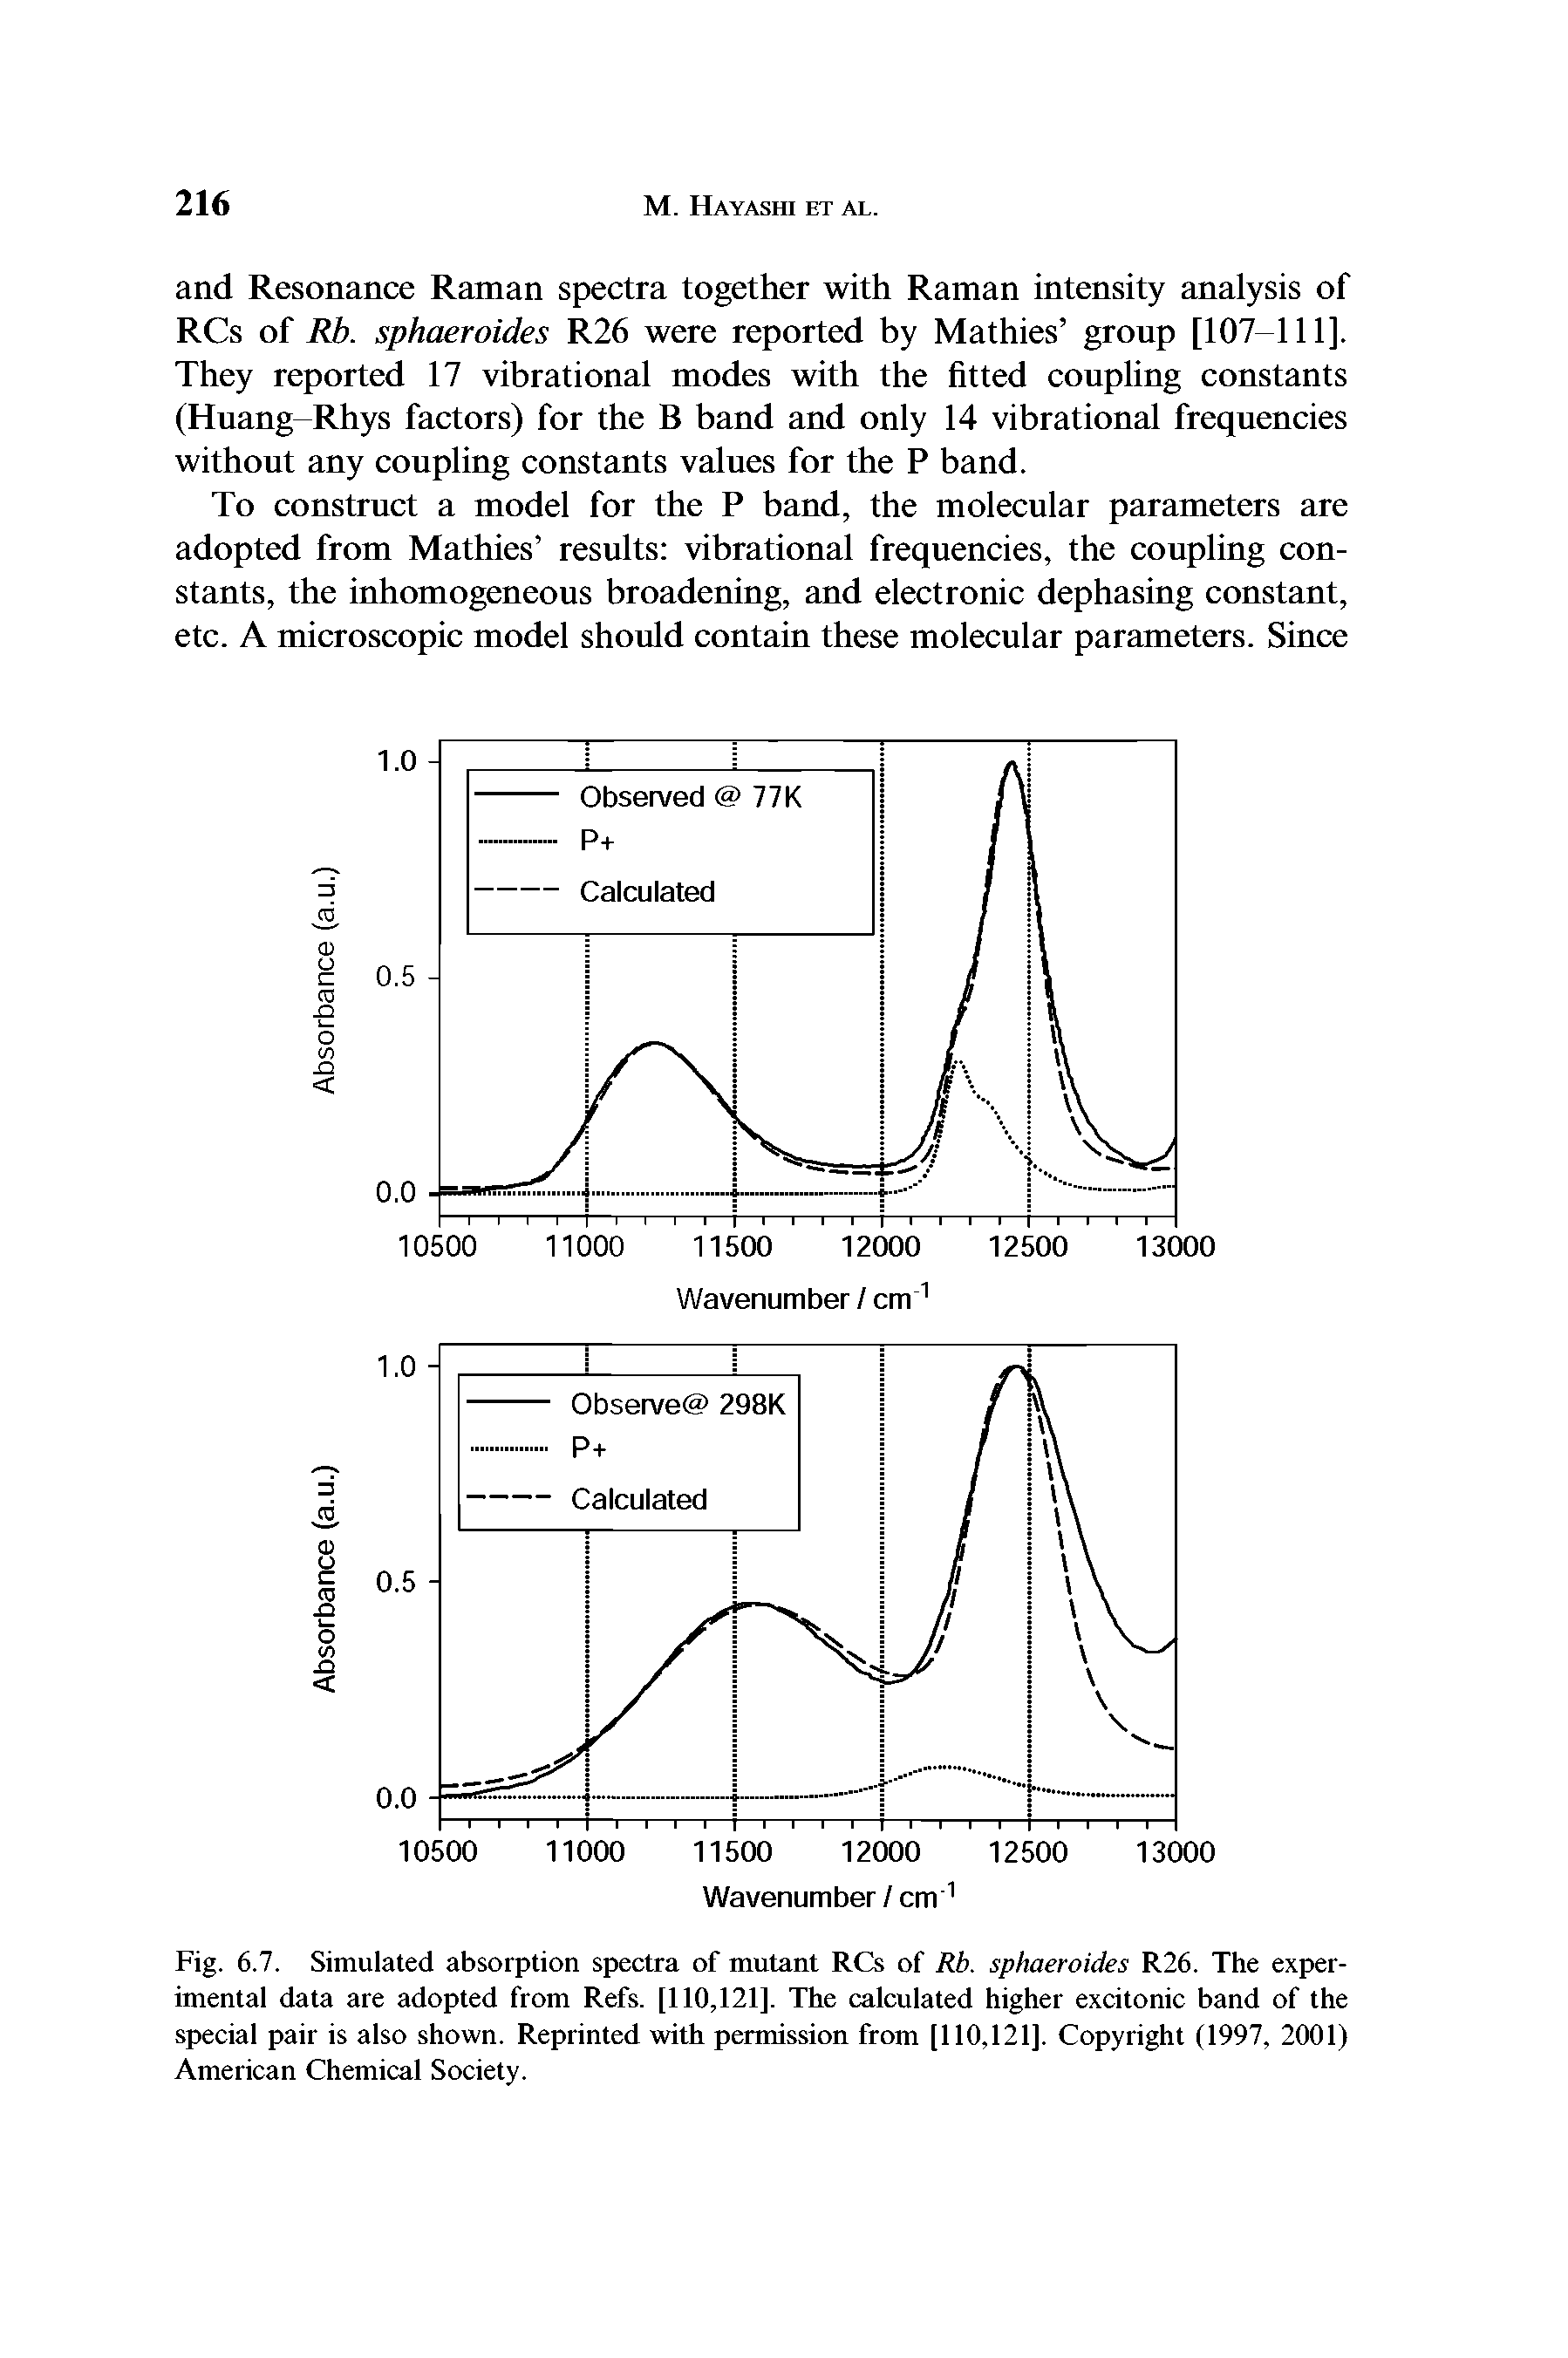 Fig. 6.7. Simulated absorption spectra of mutant RCs of Rb. sphaeroides R26. The experimental data are adopted from Refs. [110,121], The calculated higher excitonic band of the special pair is also shown. Reprinted with permission from [110,121]. Copyright (1997, 2001) American Chemical Society.